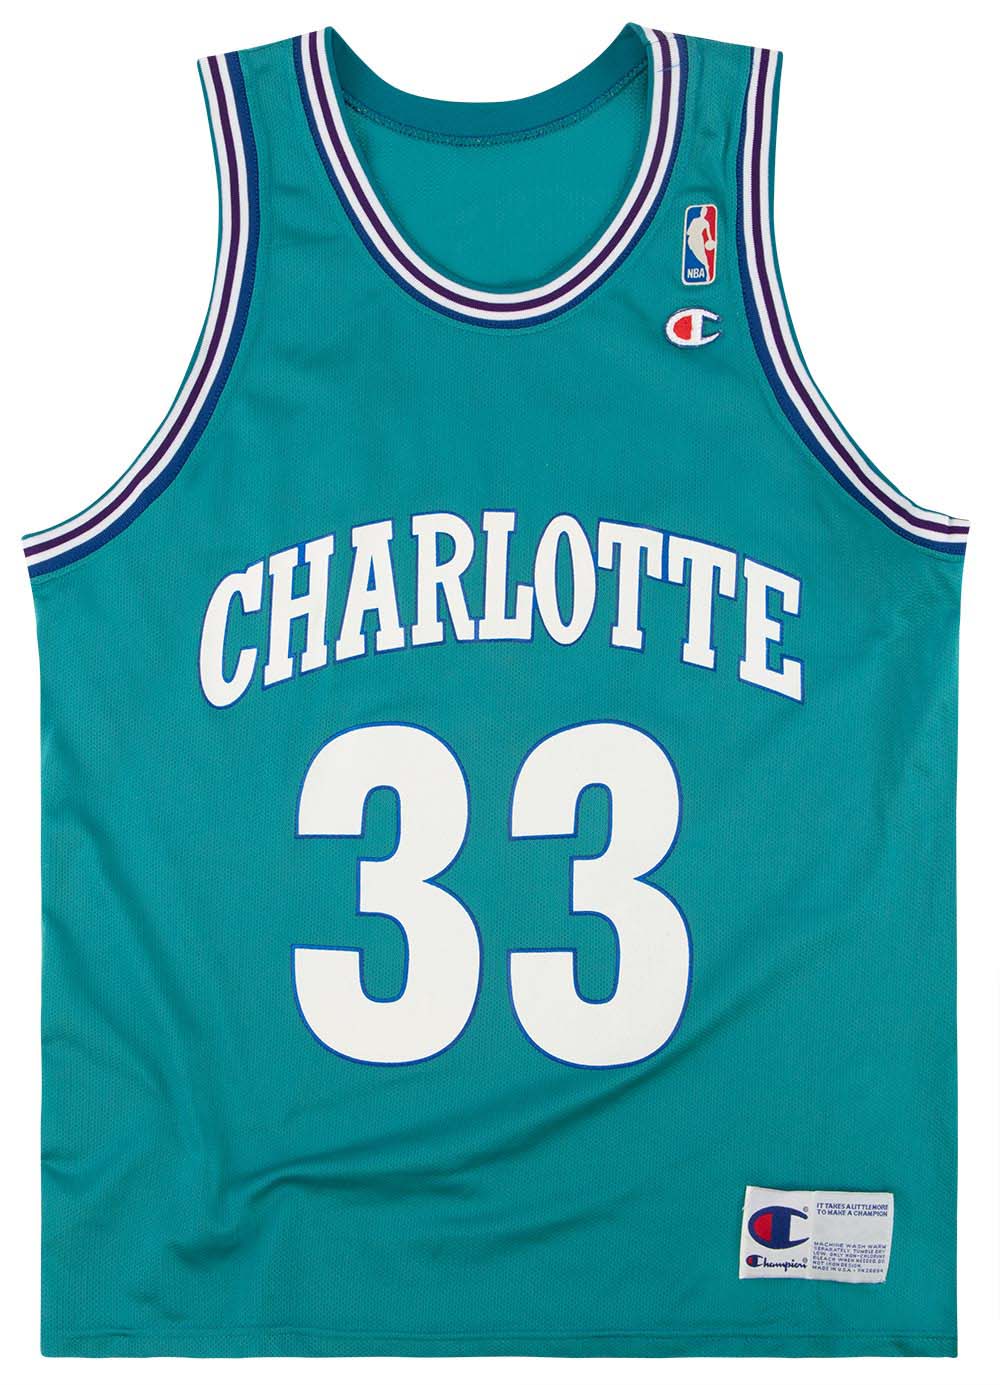 1995 CHARLOTTE HORNETS MOURNING #33 CHAMPION JERSEY (ALTERNATE) L - Classic  American Sports